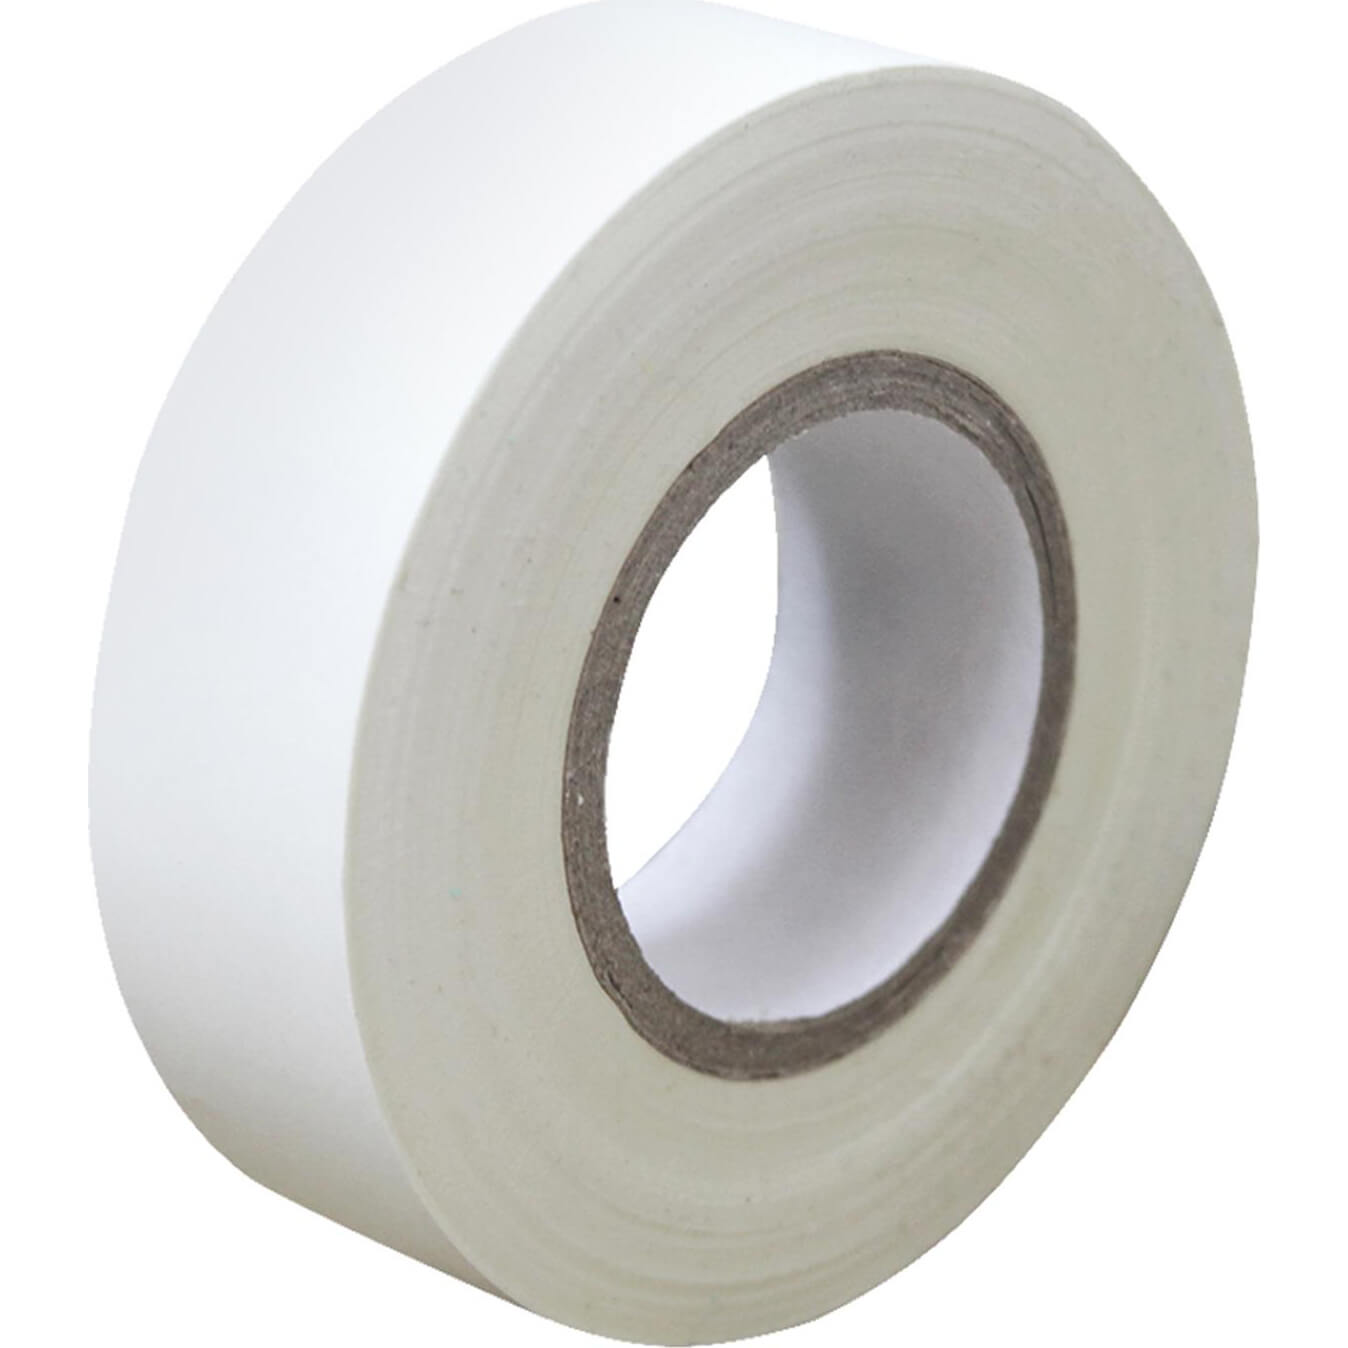 Insulation Tape White 50mm Wide x 33m Roll